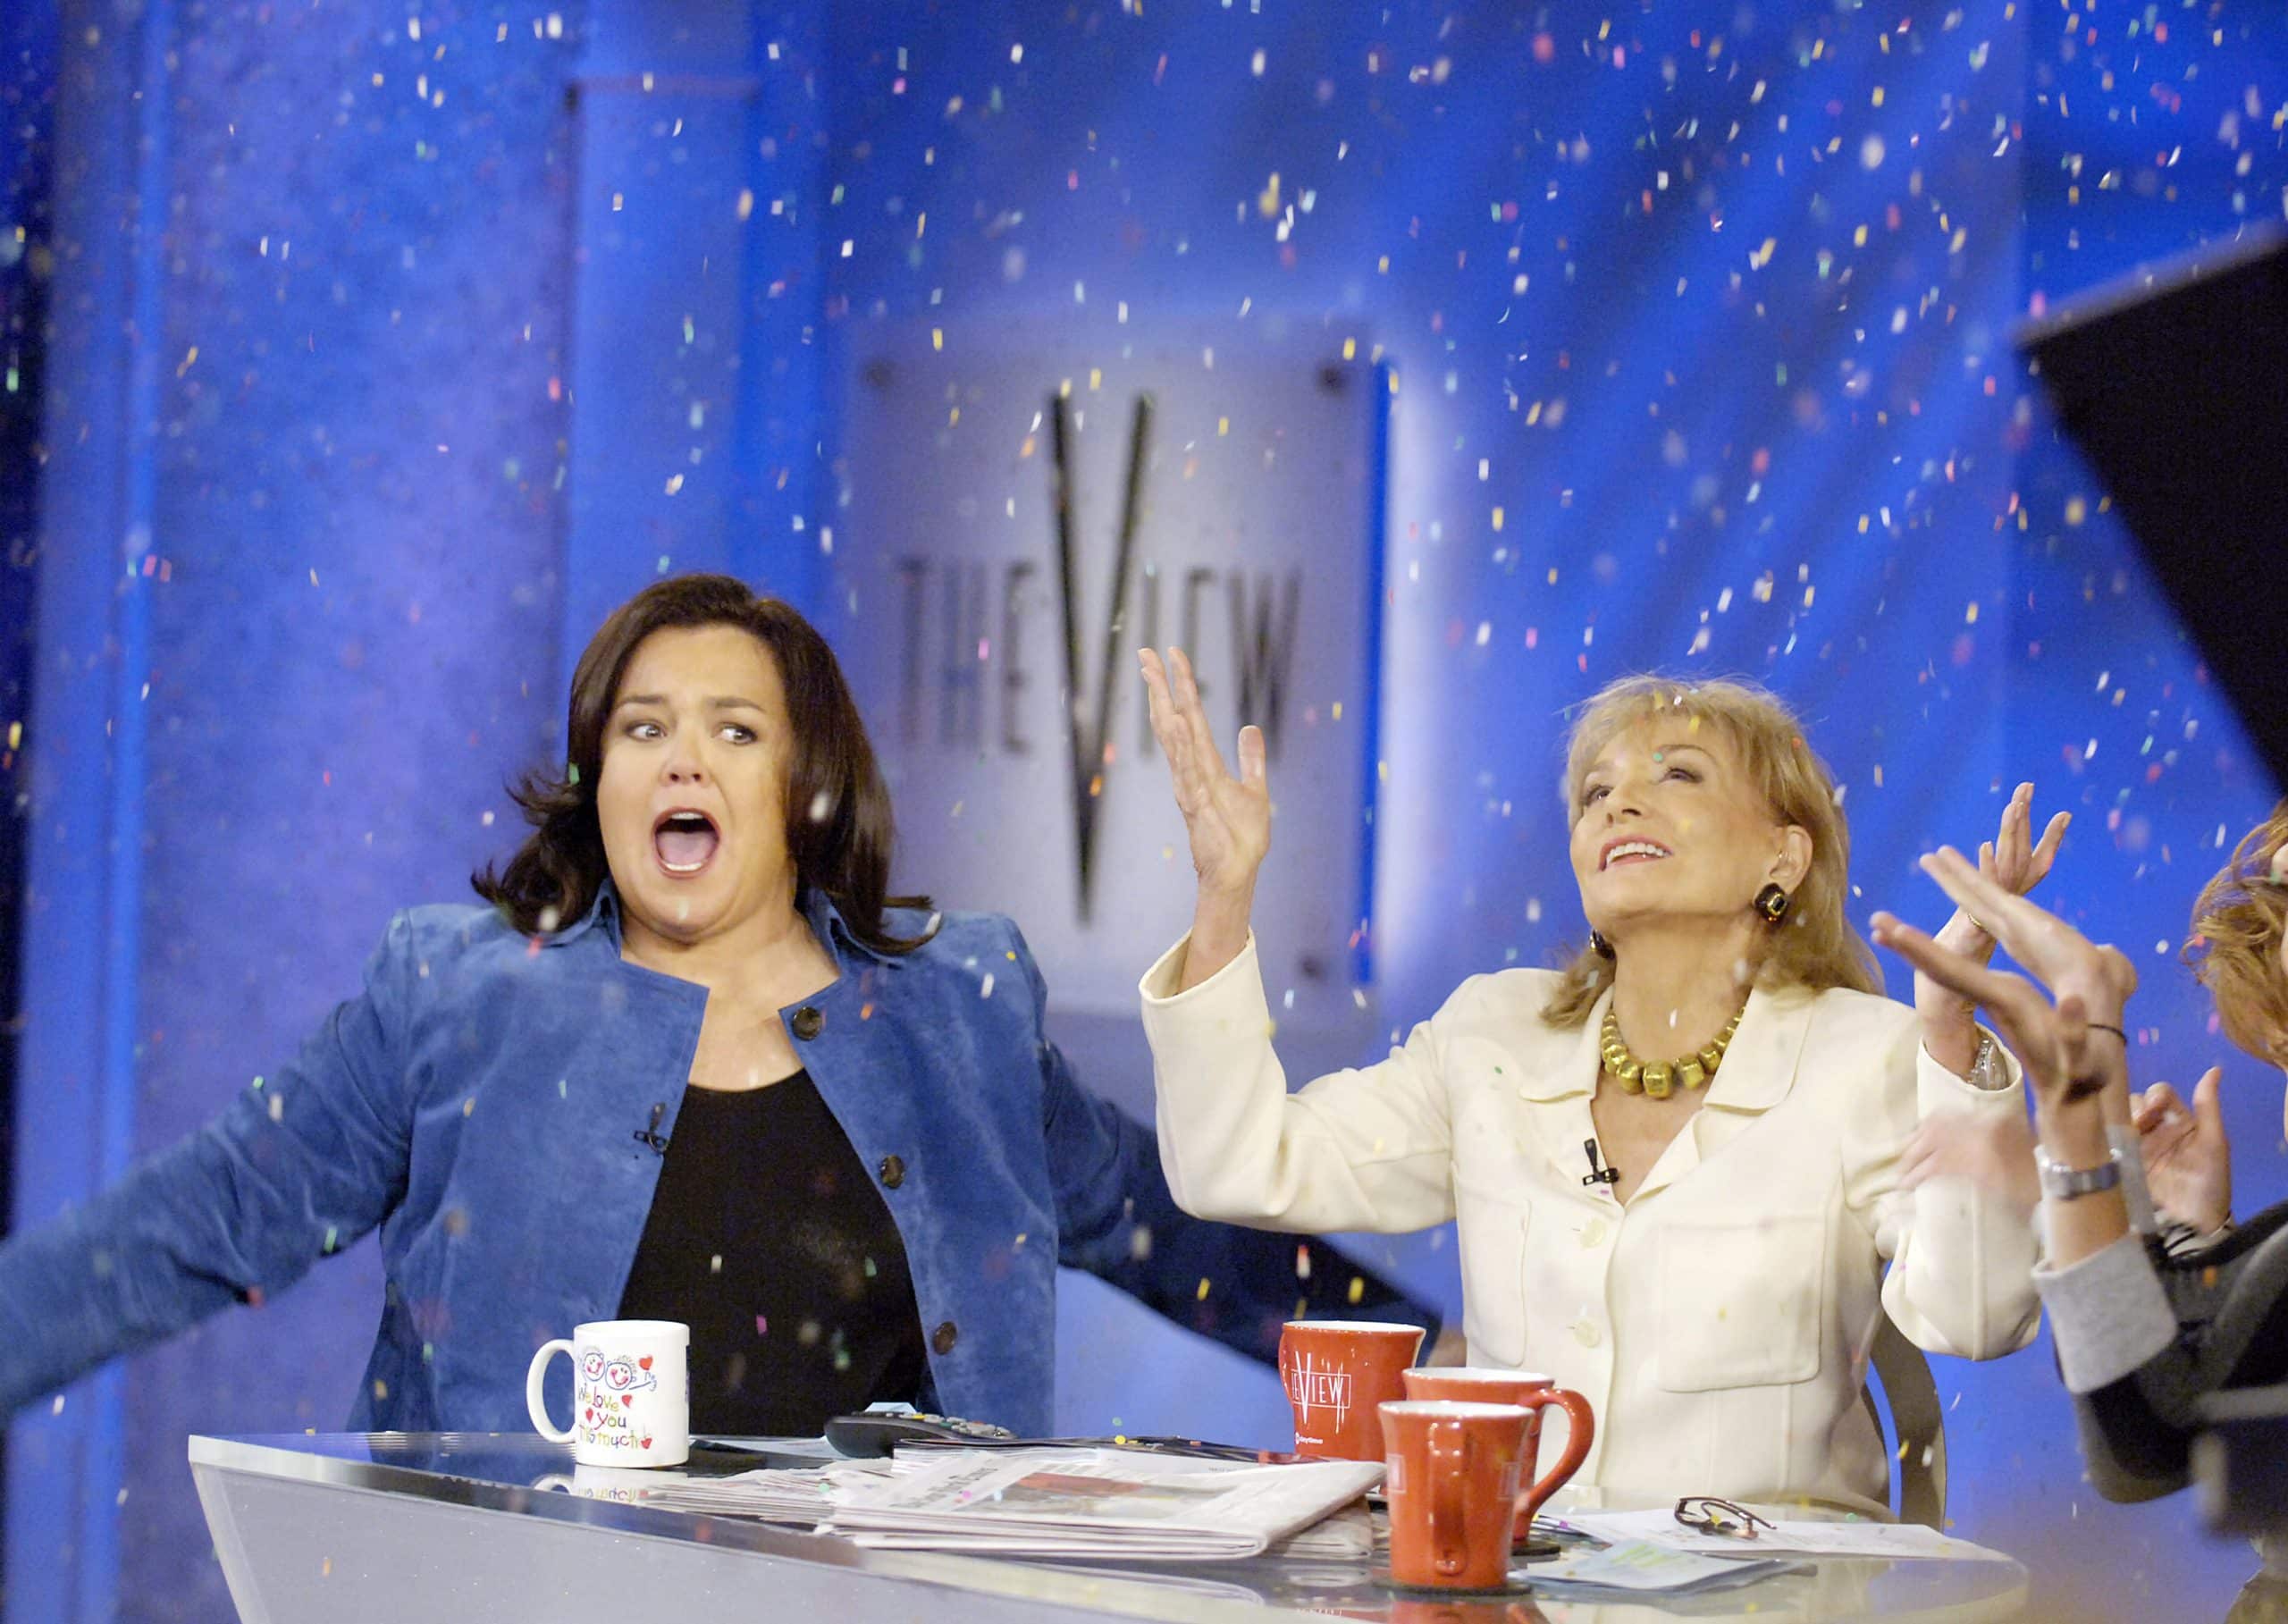 THE VIEW, Rosie O'Donnell, Barbara Walters